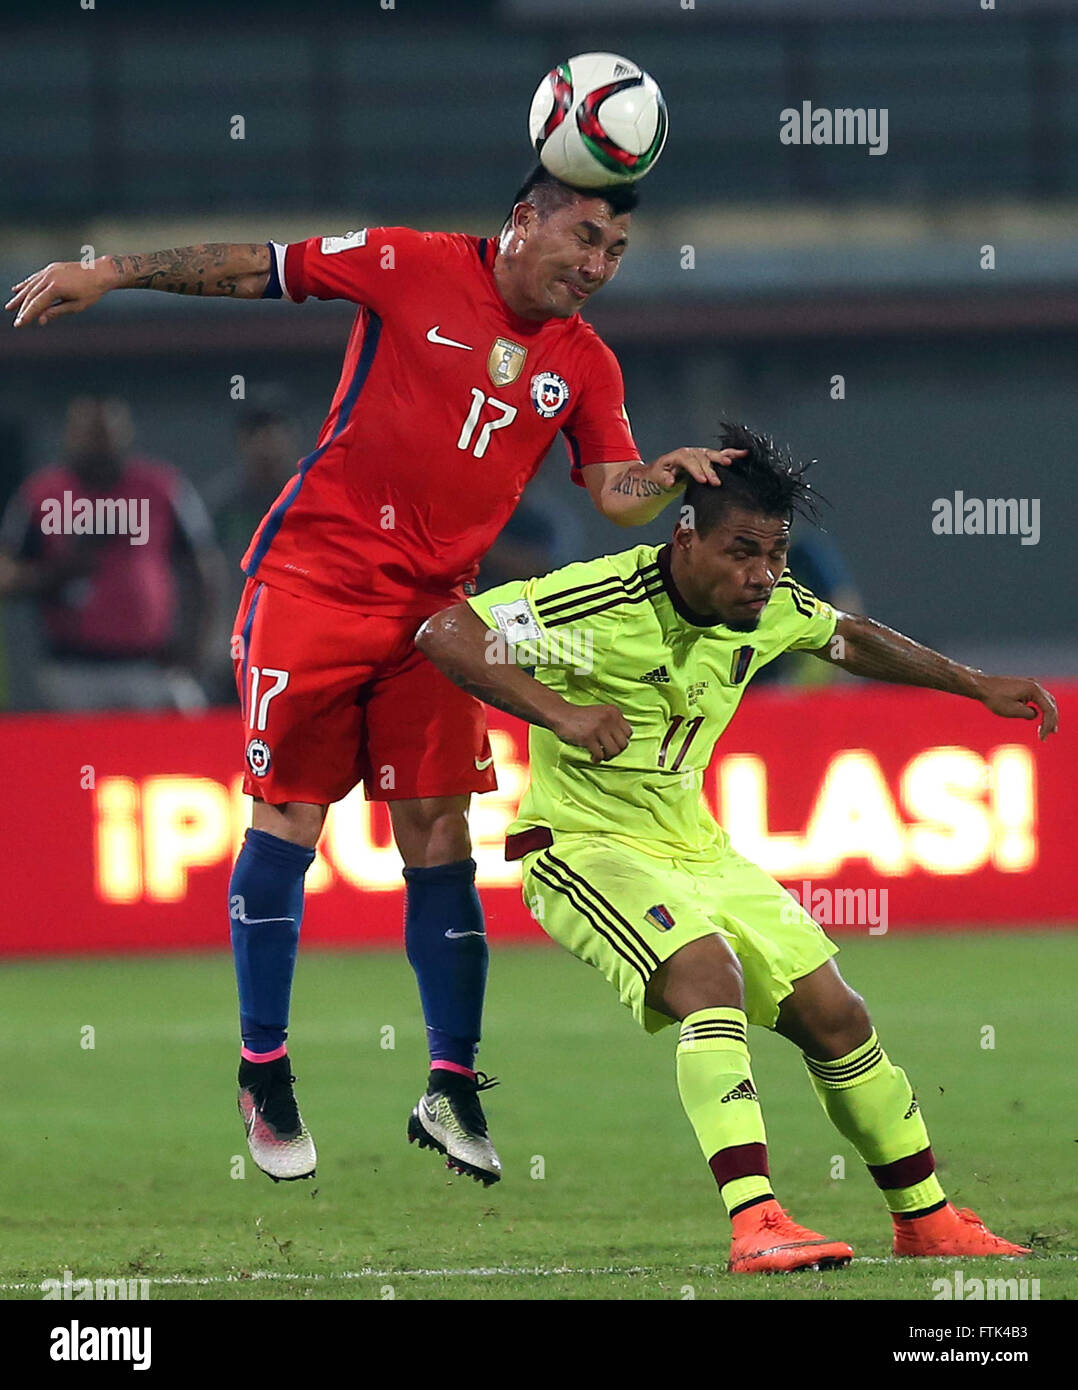 Barinas, Venezuela. 29th Mar, 2016. Venezuela's Juanpi (R) vies with Chile's Gary Medel during Russia 2018 FIFA World Cup South America Qualifier, at Agustin Tovar Stadium, in Barinas, Venezuela, on March 29, 2016. Chile won 4-1. © ANFP/Xinhua/Alamy Live News Stock Photo